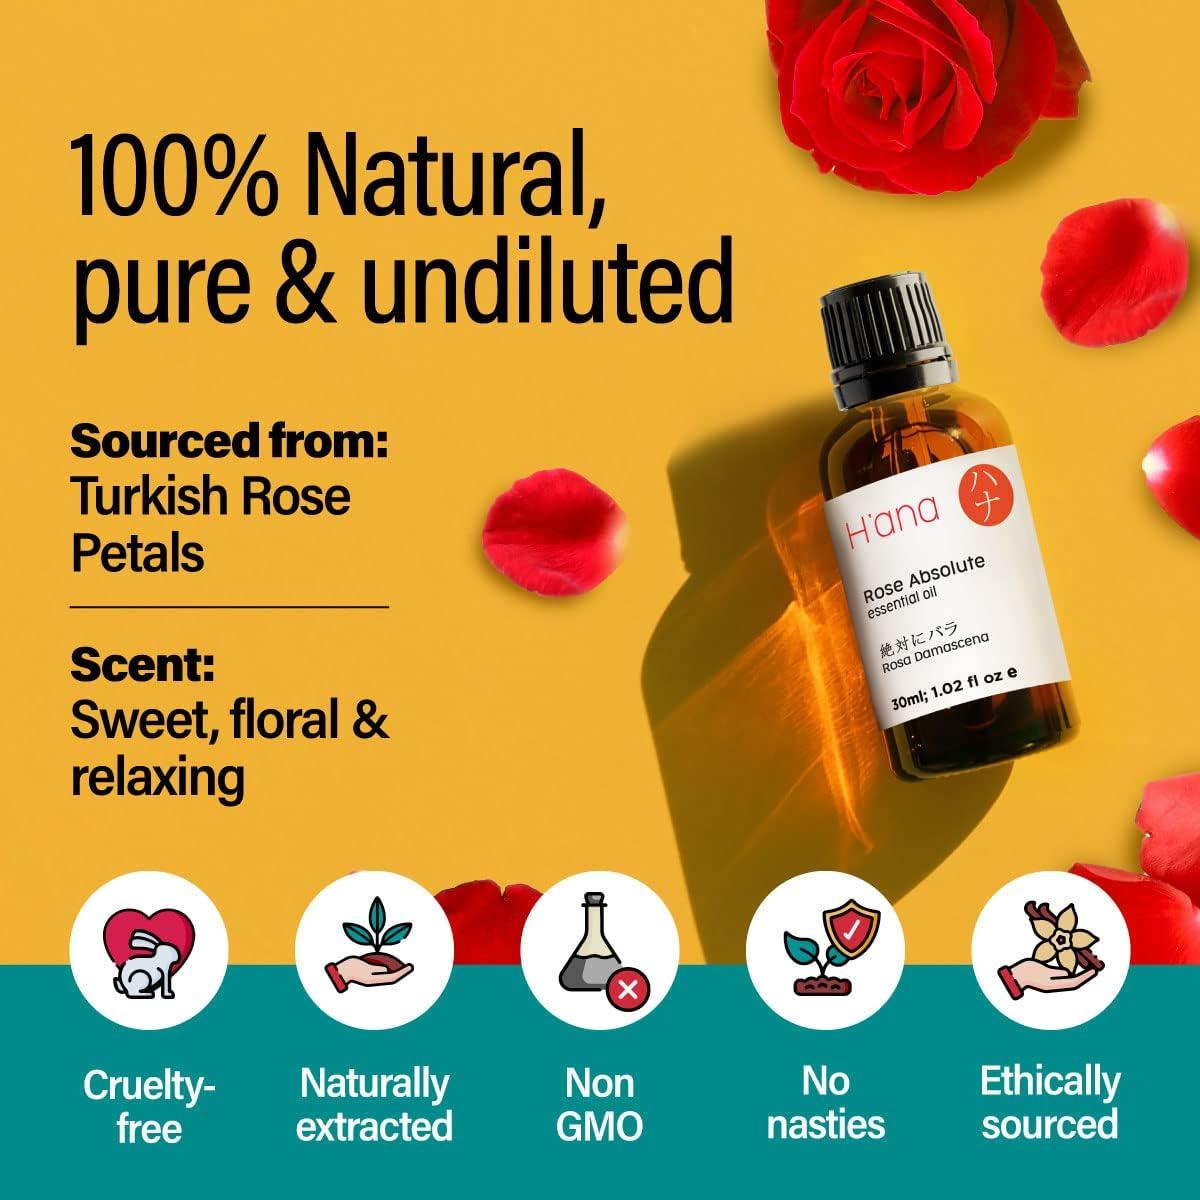 Rose Essential Oil Aromatherapy Oil, 100% Pure Essential Oils for